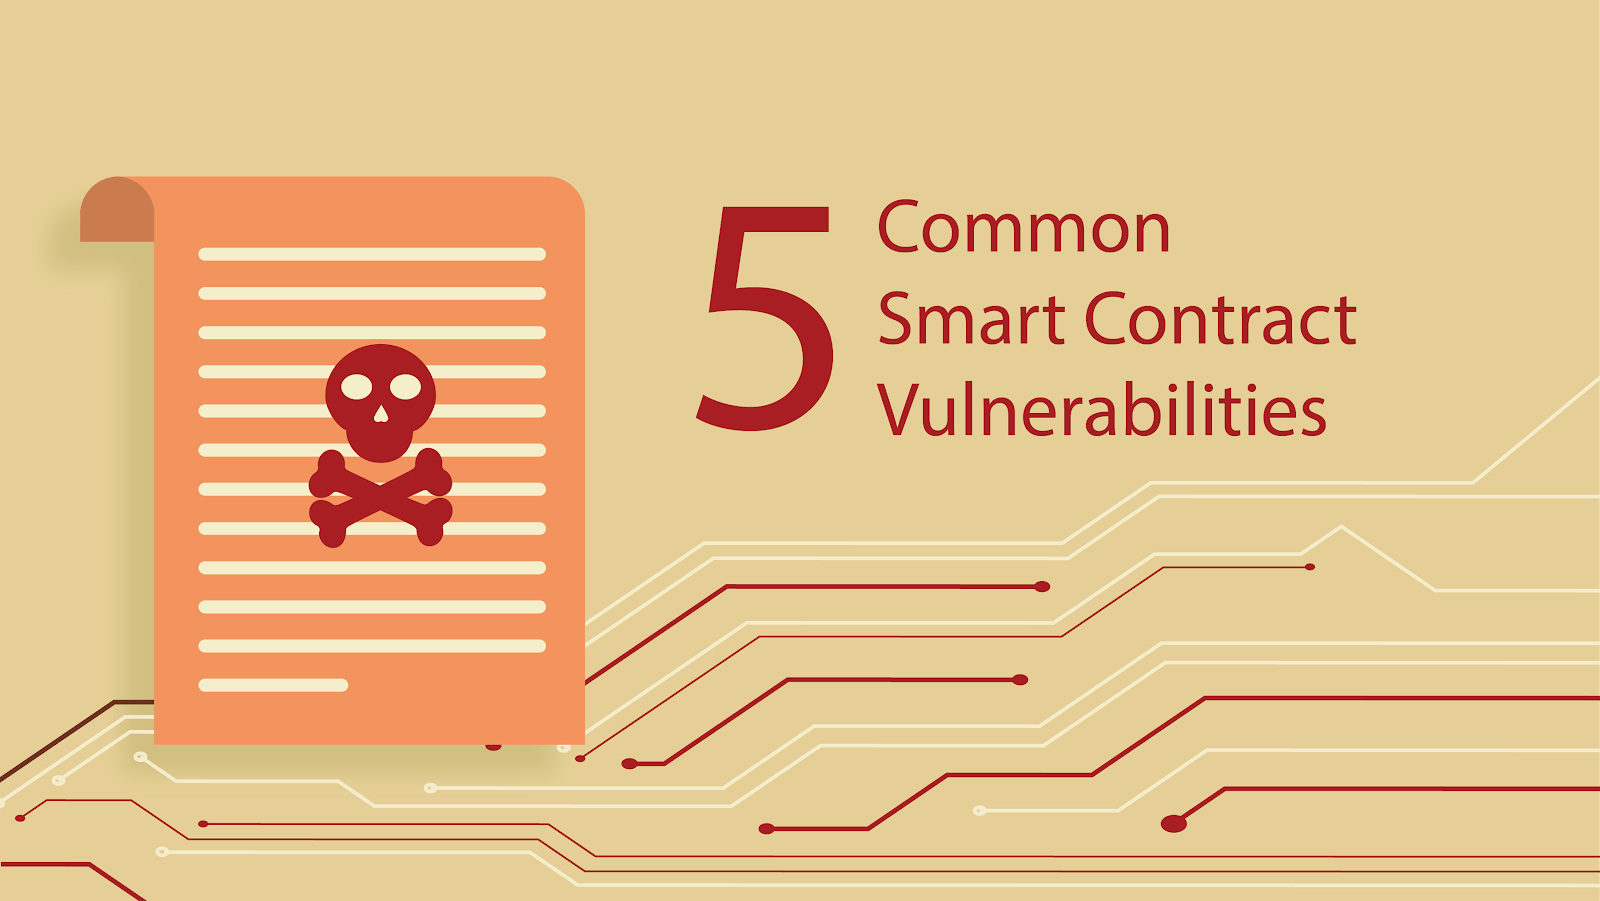 5 Common Smart Contract Vulnerabilities and Bugs You Should Know About